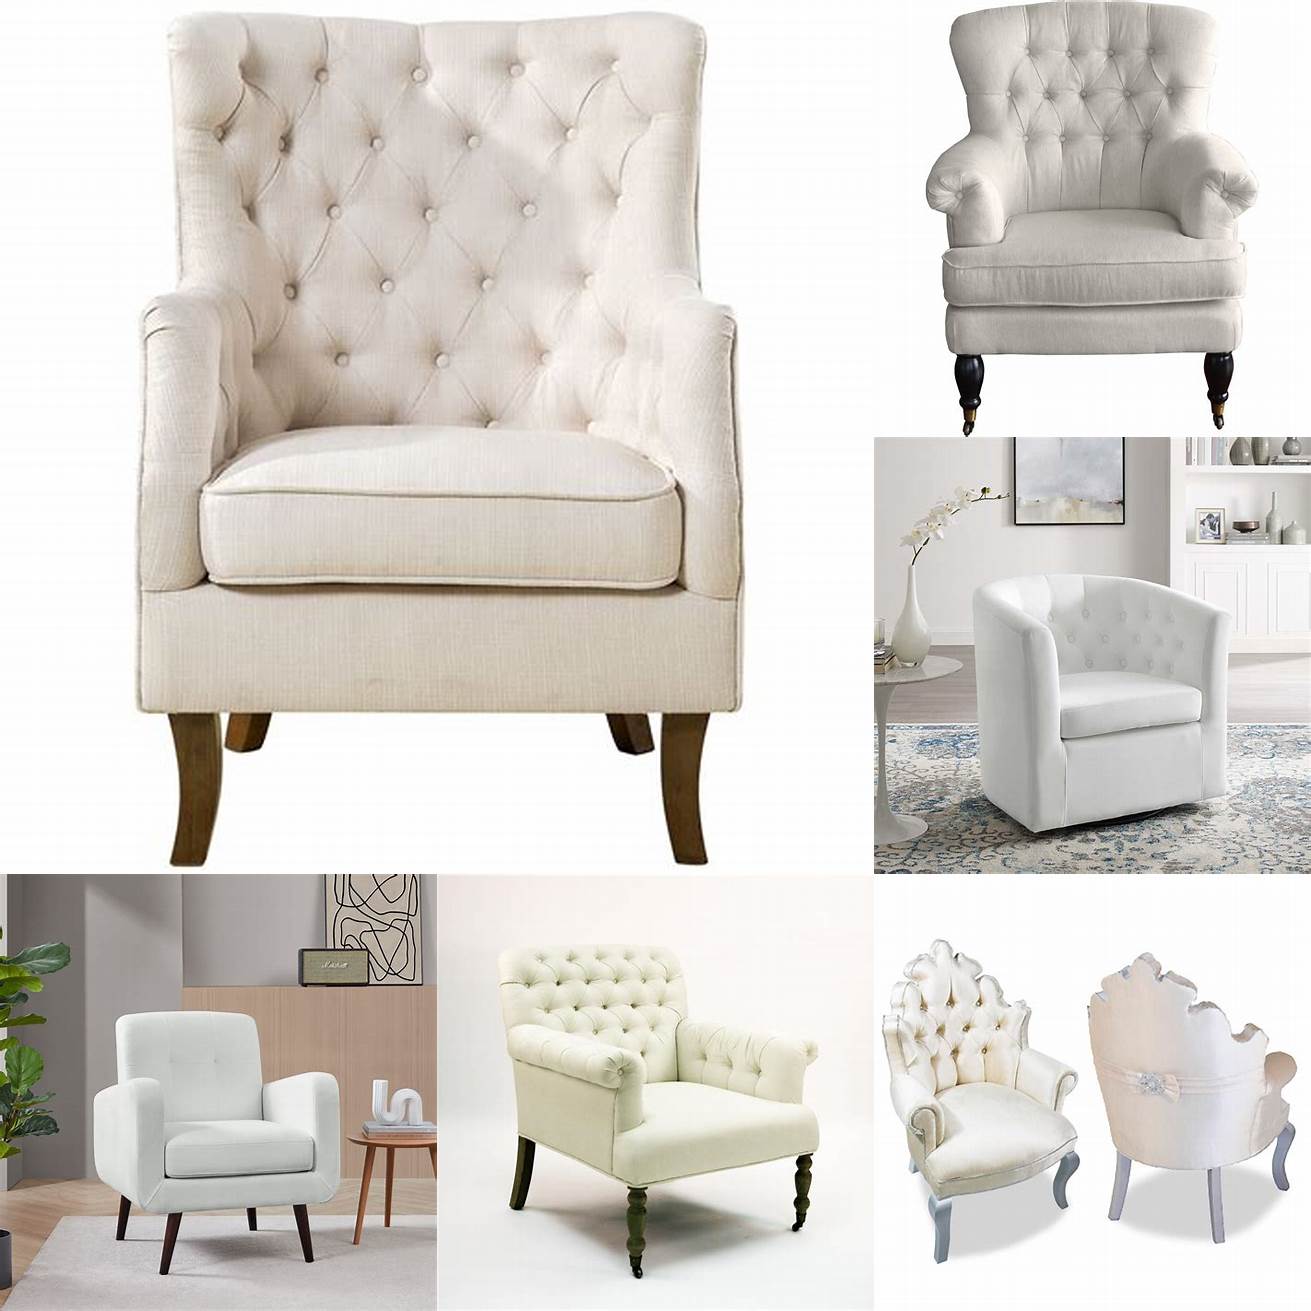 A white armchair with a tufted back